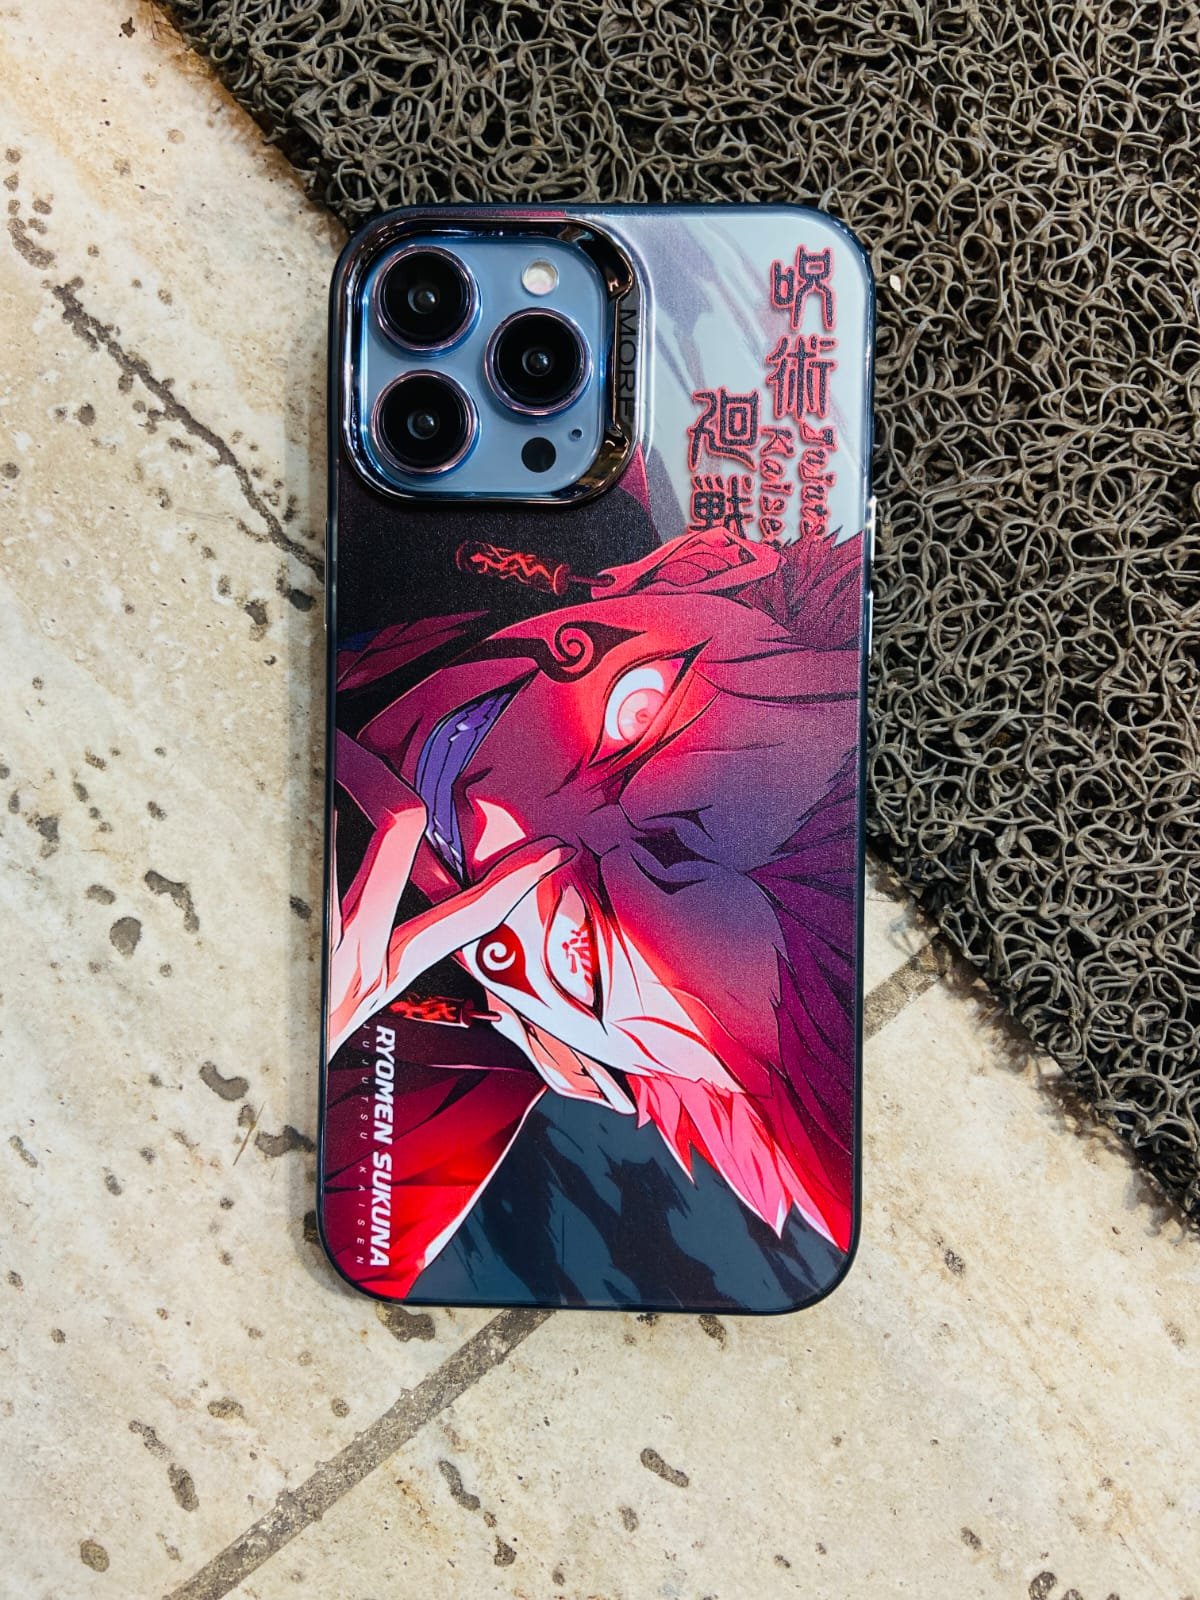 LED Phone Case | Light-Up Anime Cases to Match Your Style